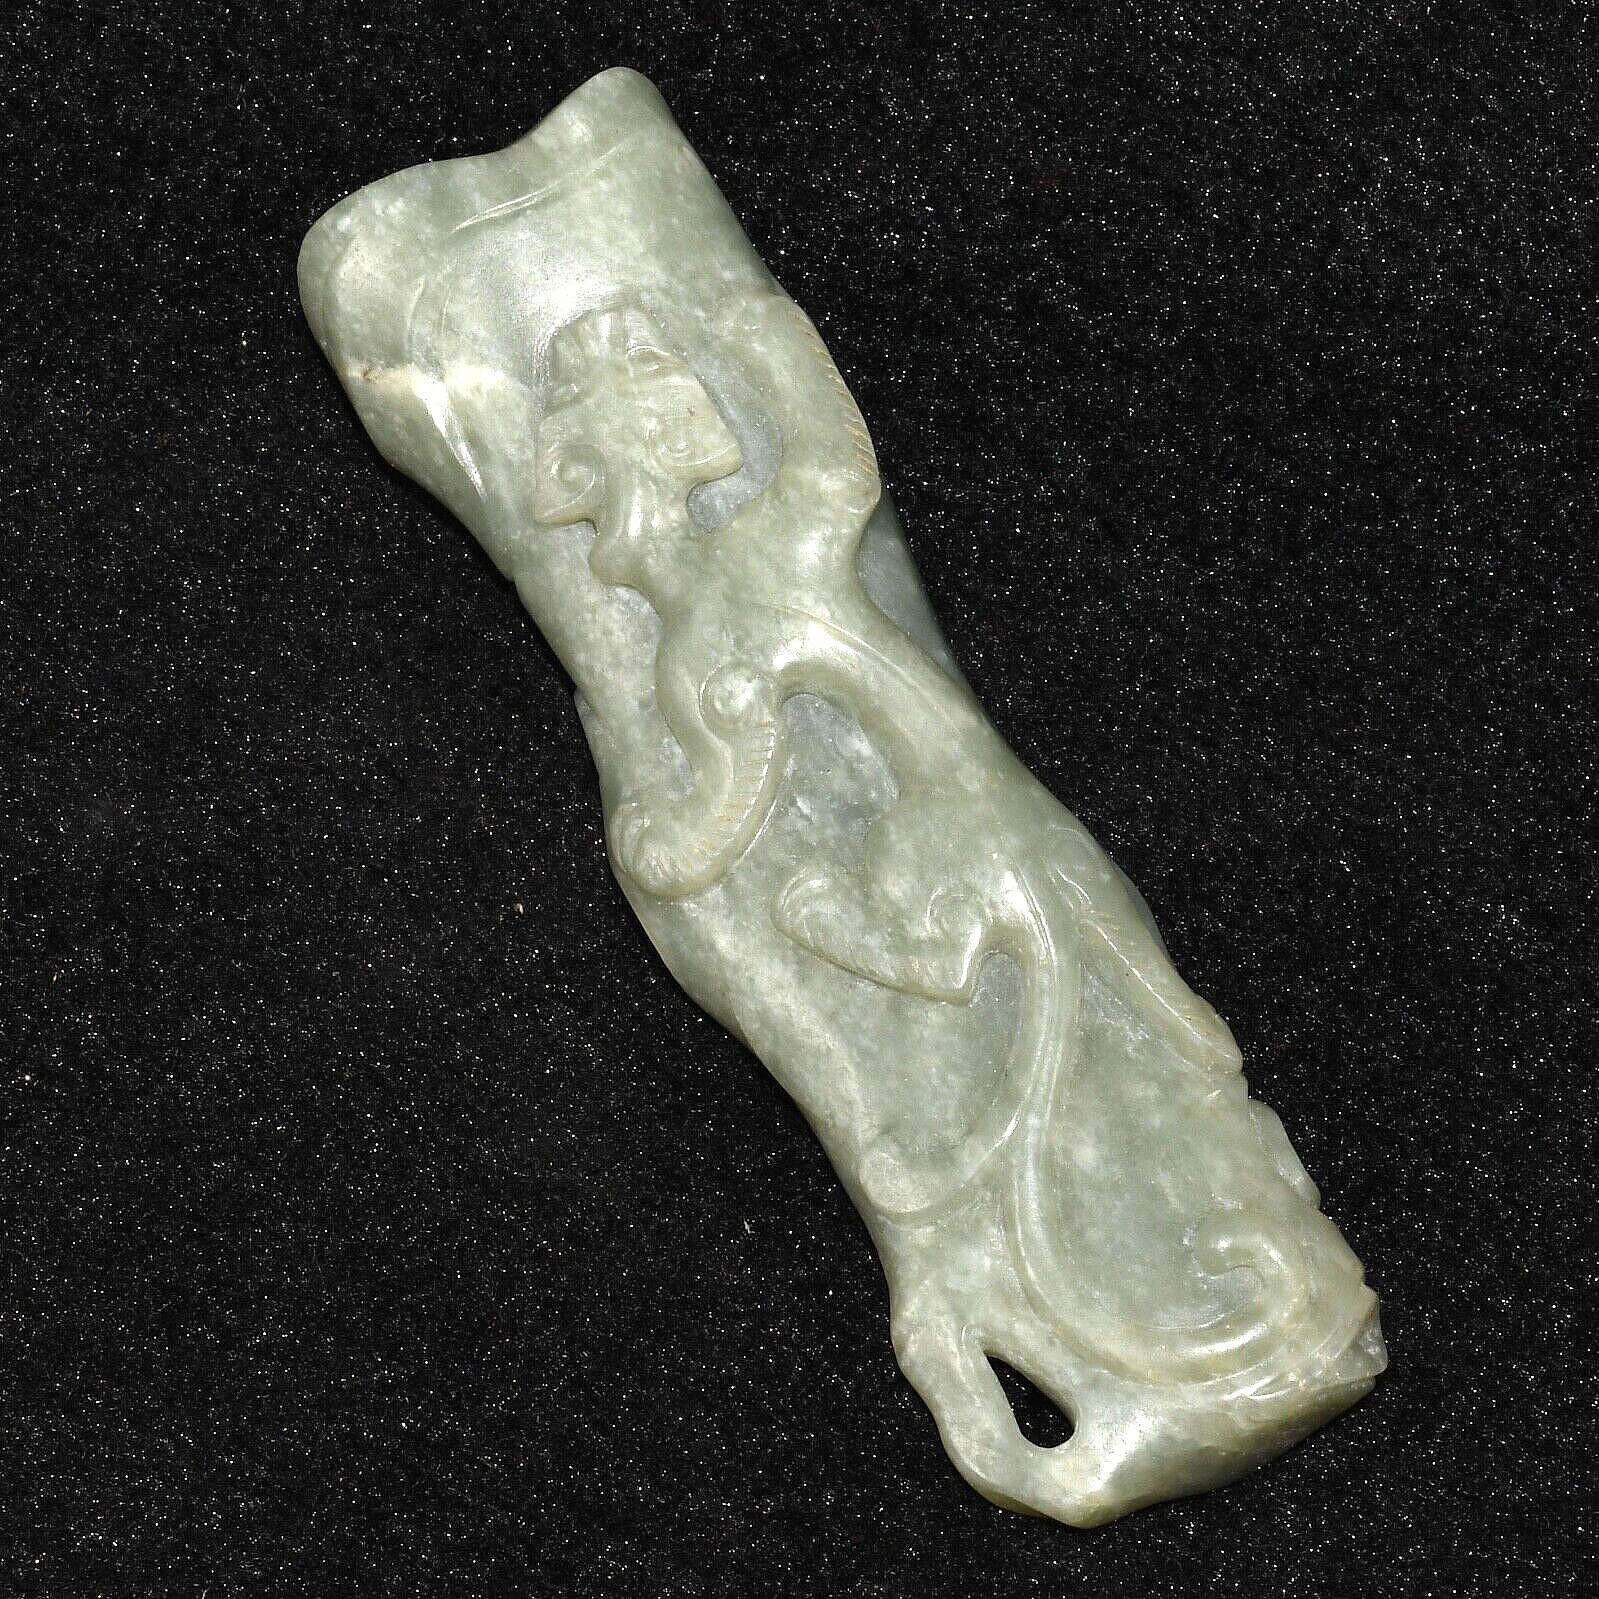 Authentic Ancient Chinese Natural Jade Stone Ornament Handle Ca. 3000 - 2000 BCE